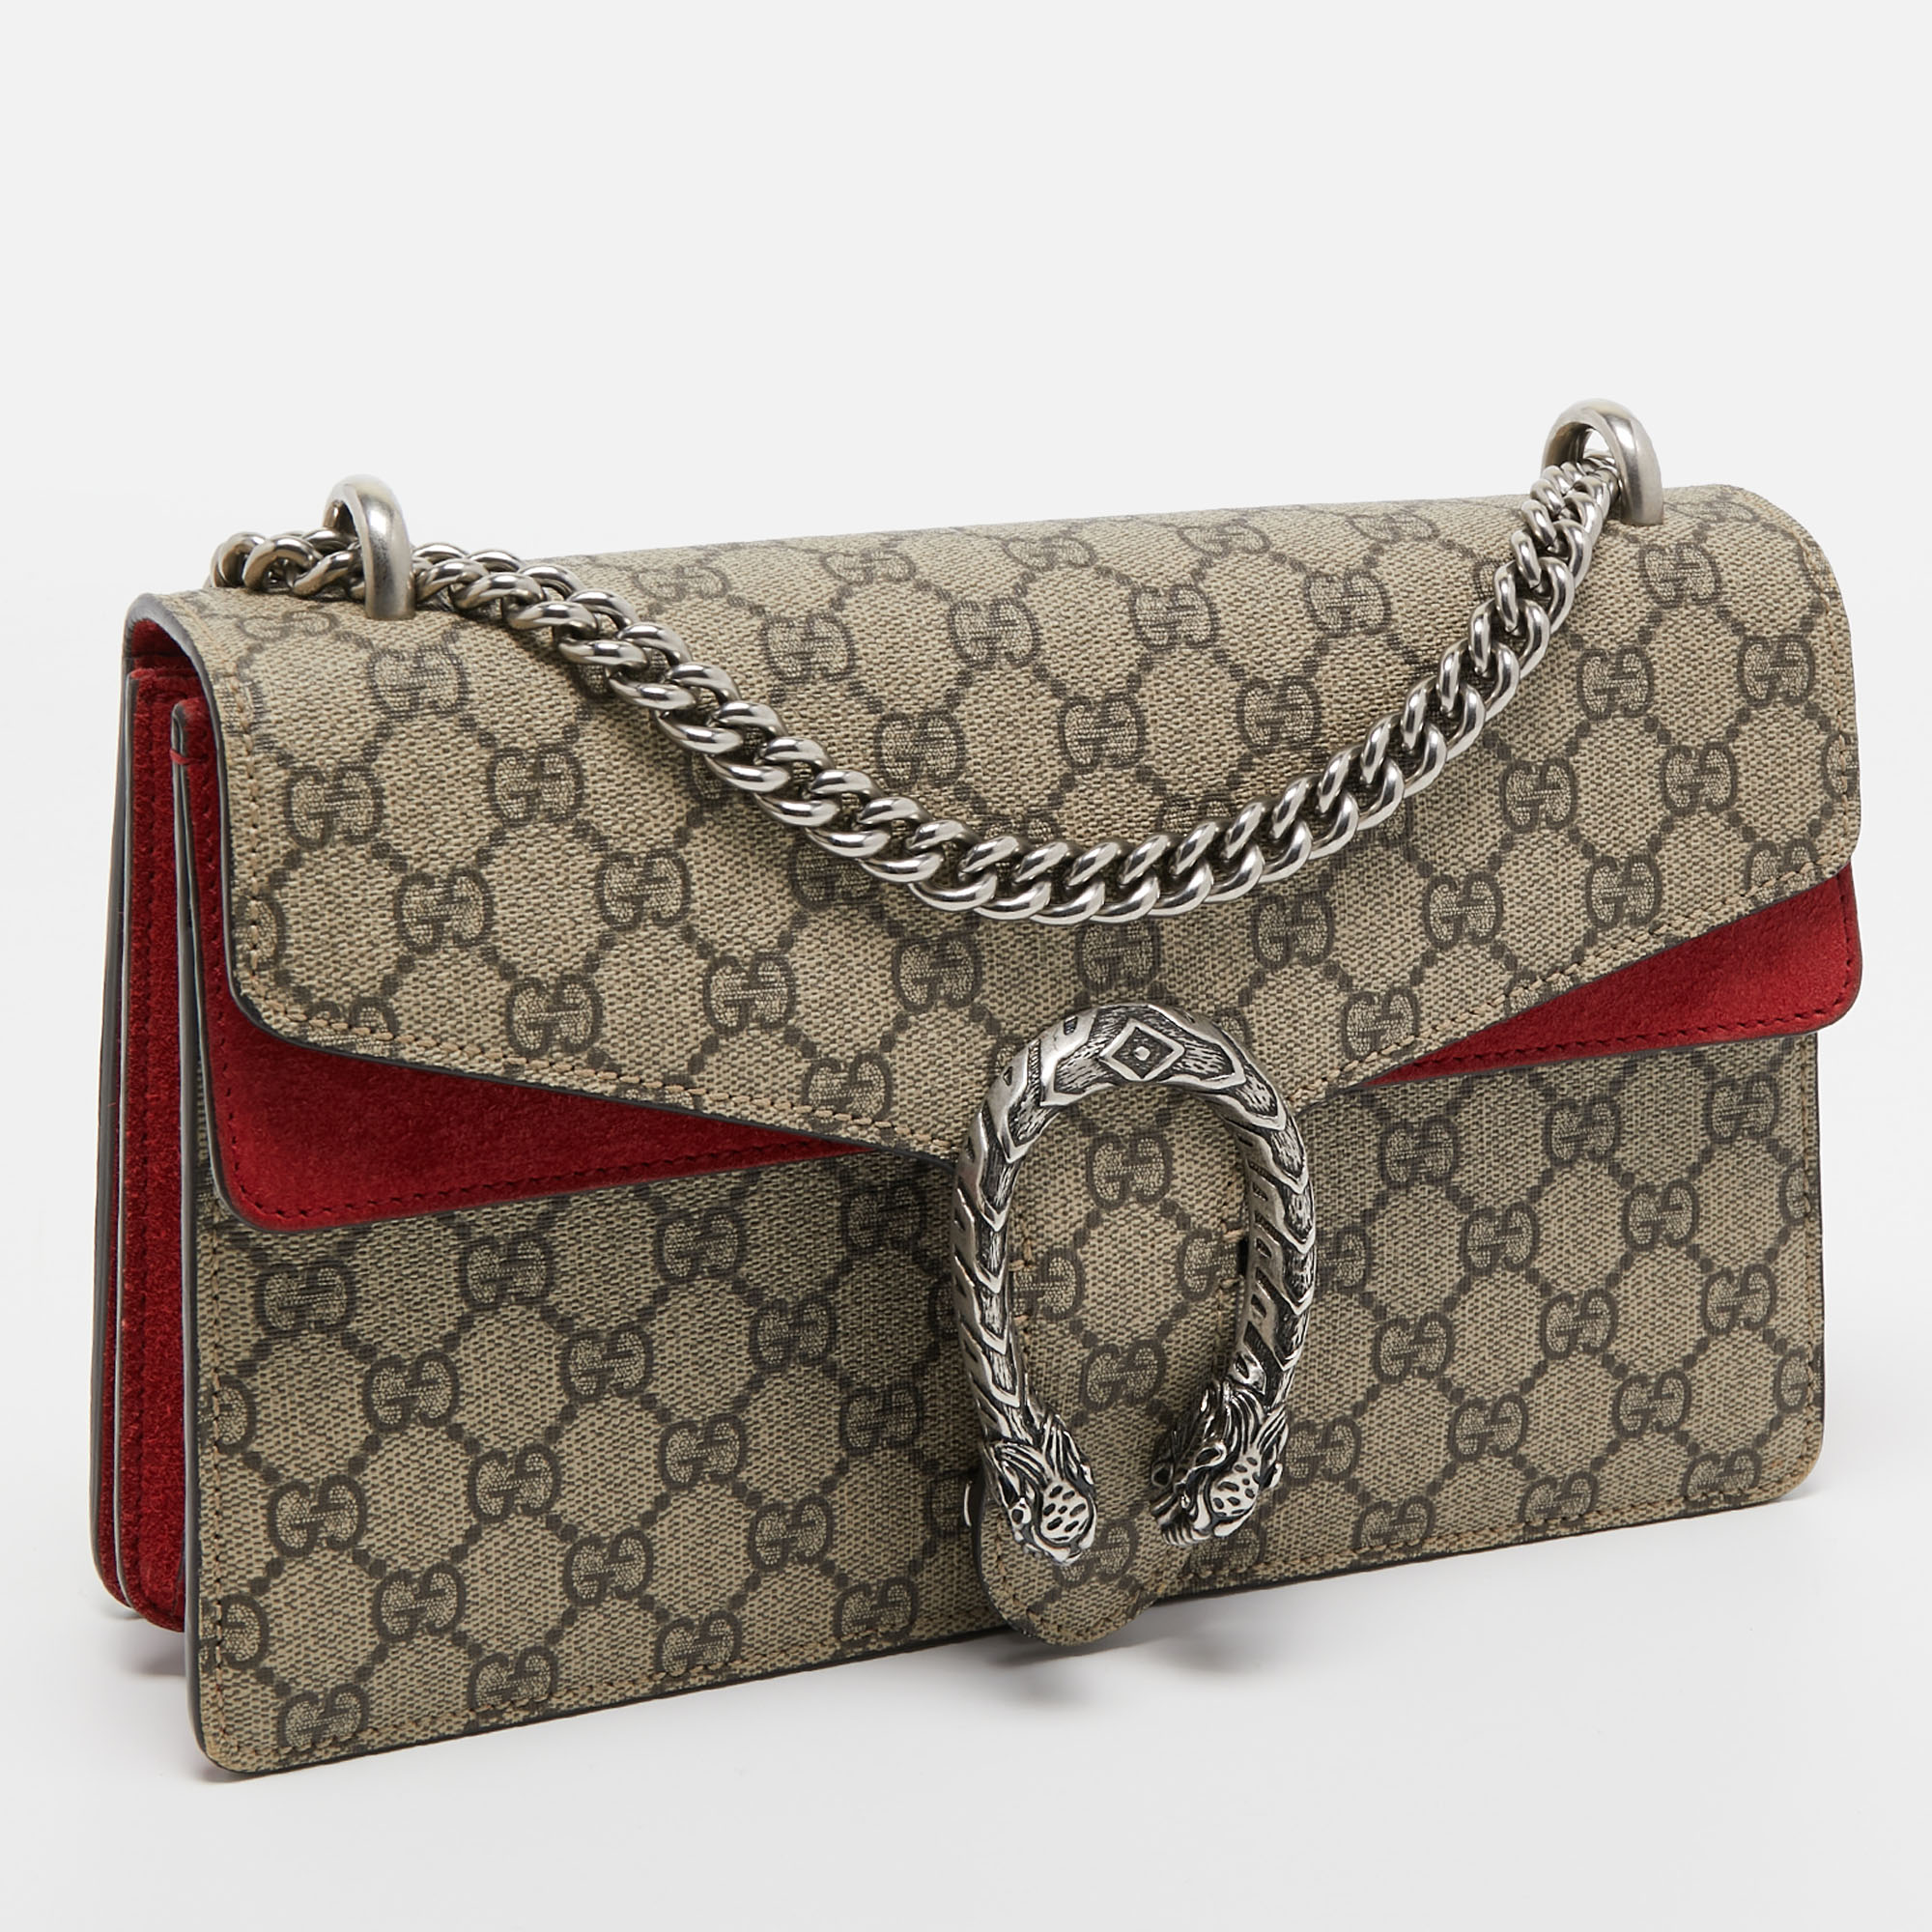 Gucci Red/Beige GG Supreme Canvas And Suede Small Dionysus Shoulder Bag